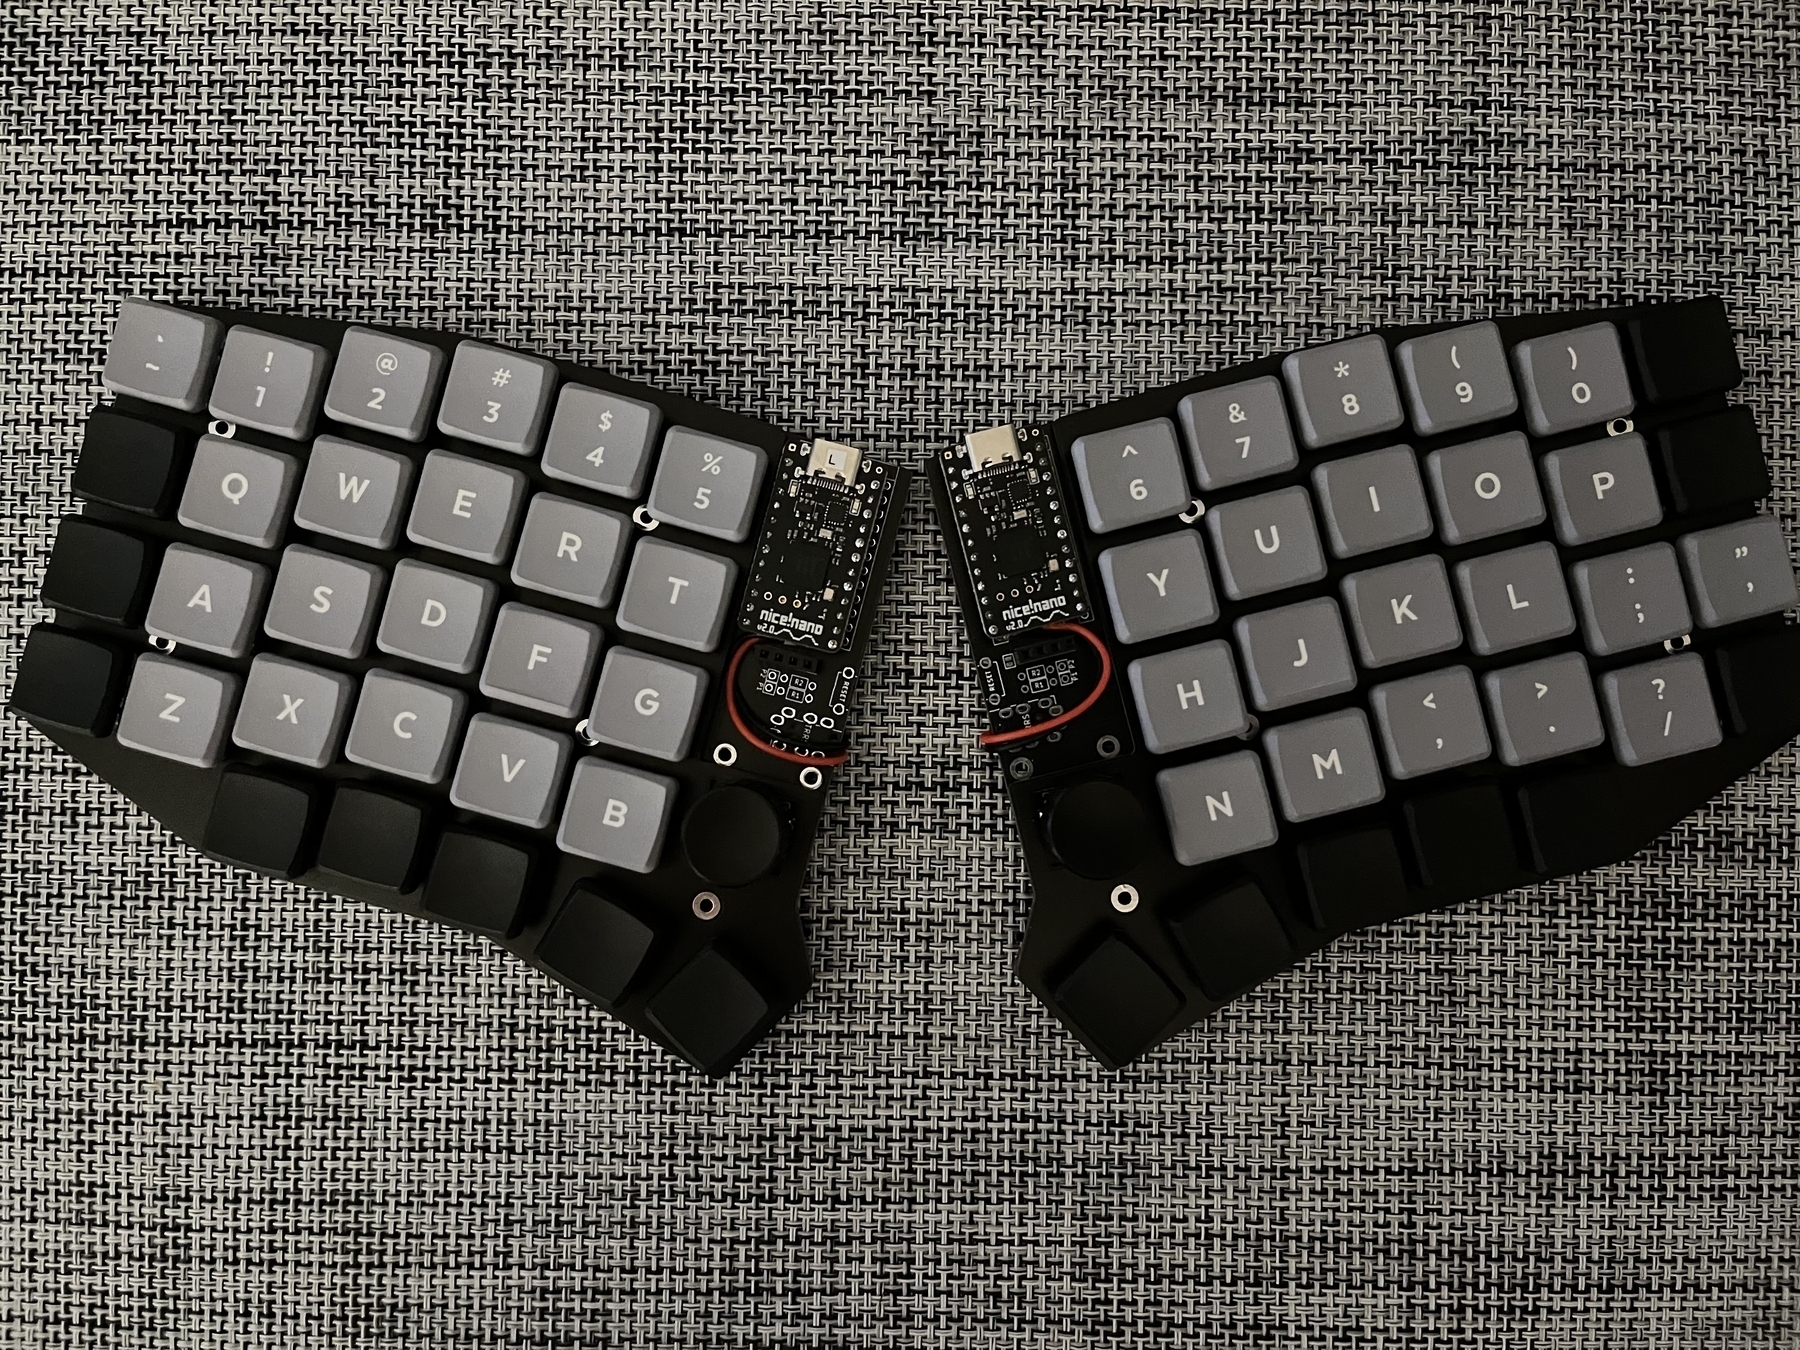 Photo of a split mechanical keyboard with grey alphanumeric keycaps and blank, black modifier keycaps.